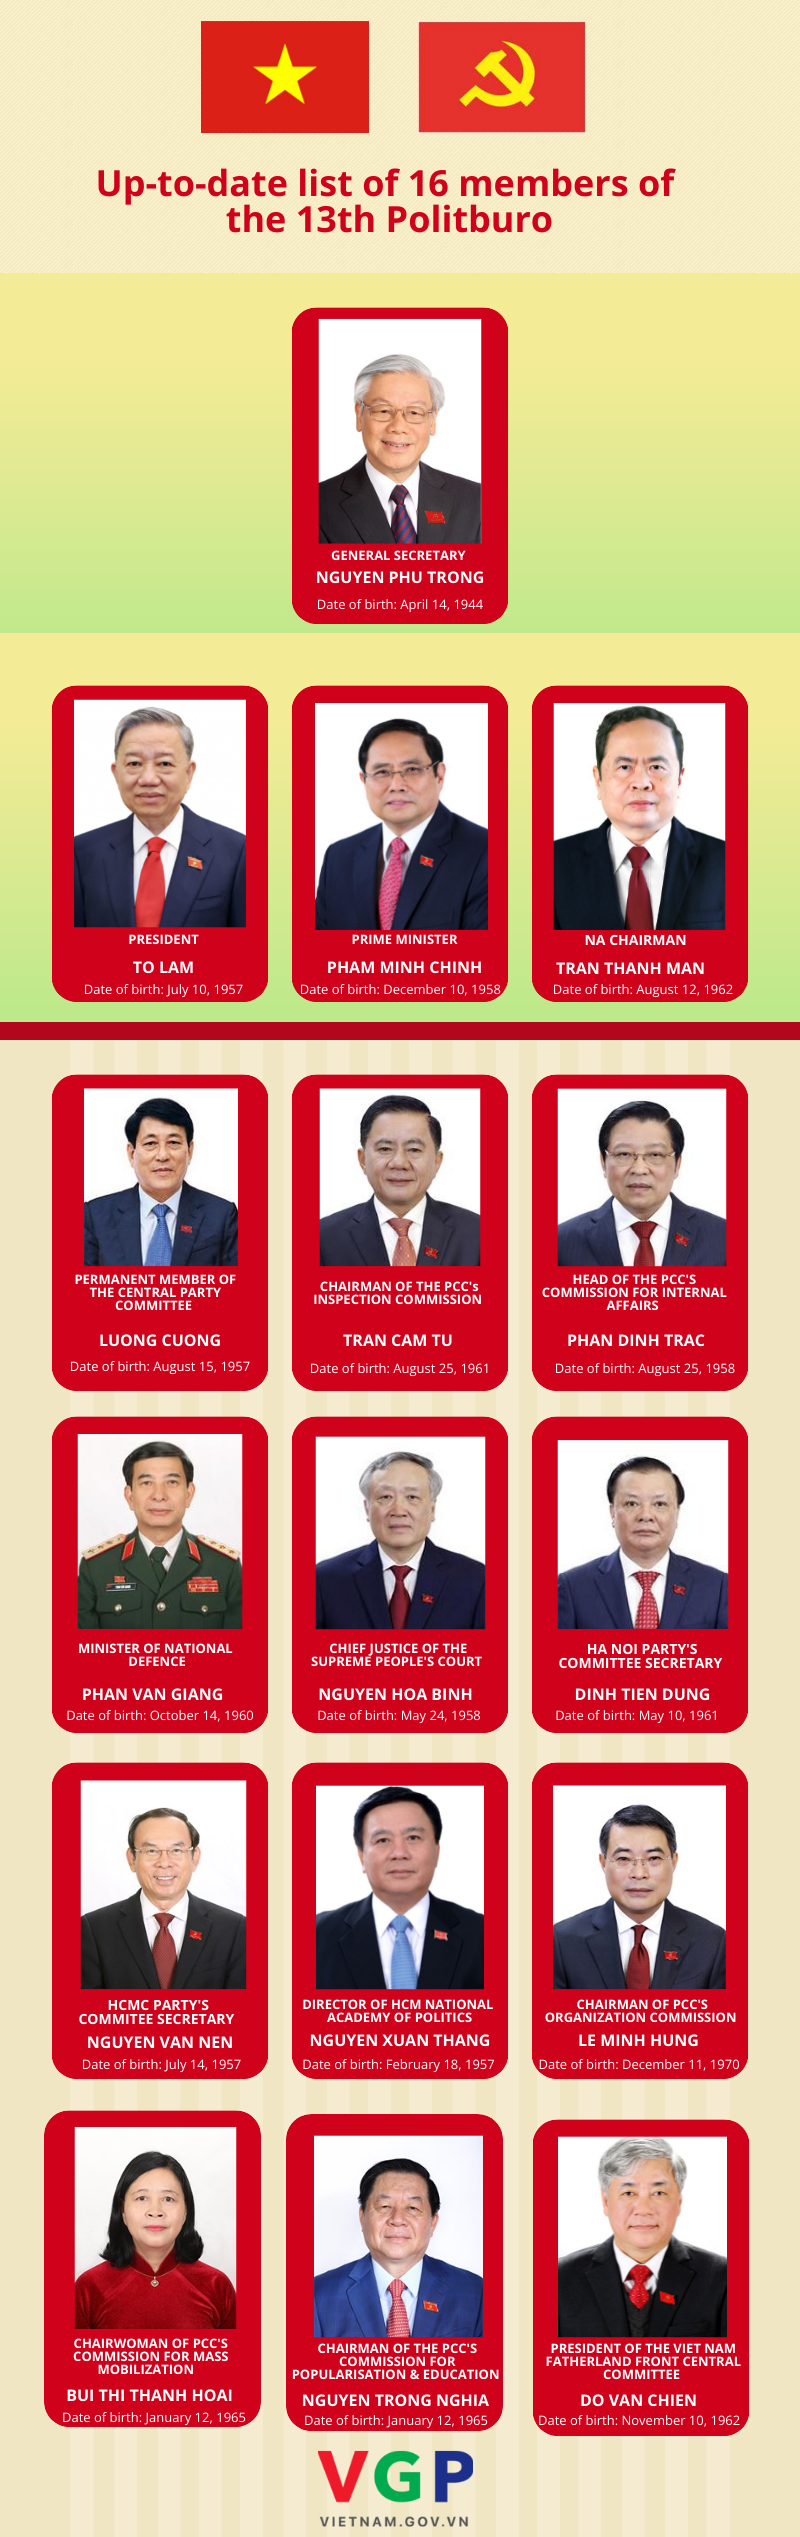 INFOGRAPHIC: LIST OF 16 MEMBERS OF 13TH POLIBURO- Ảnh 1.